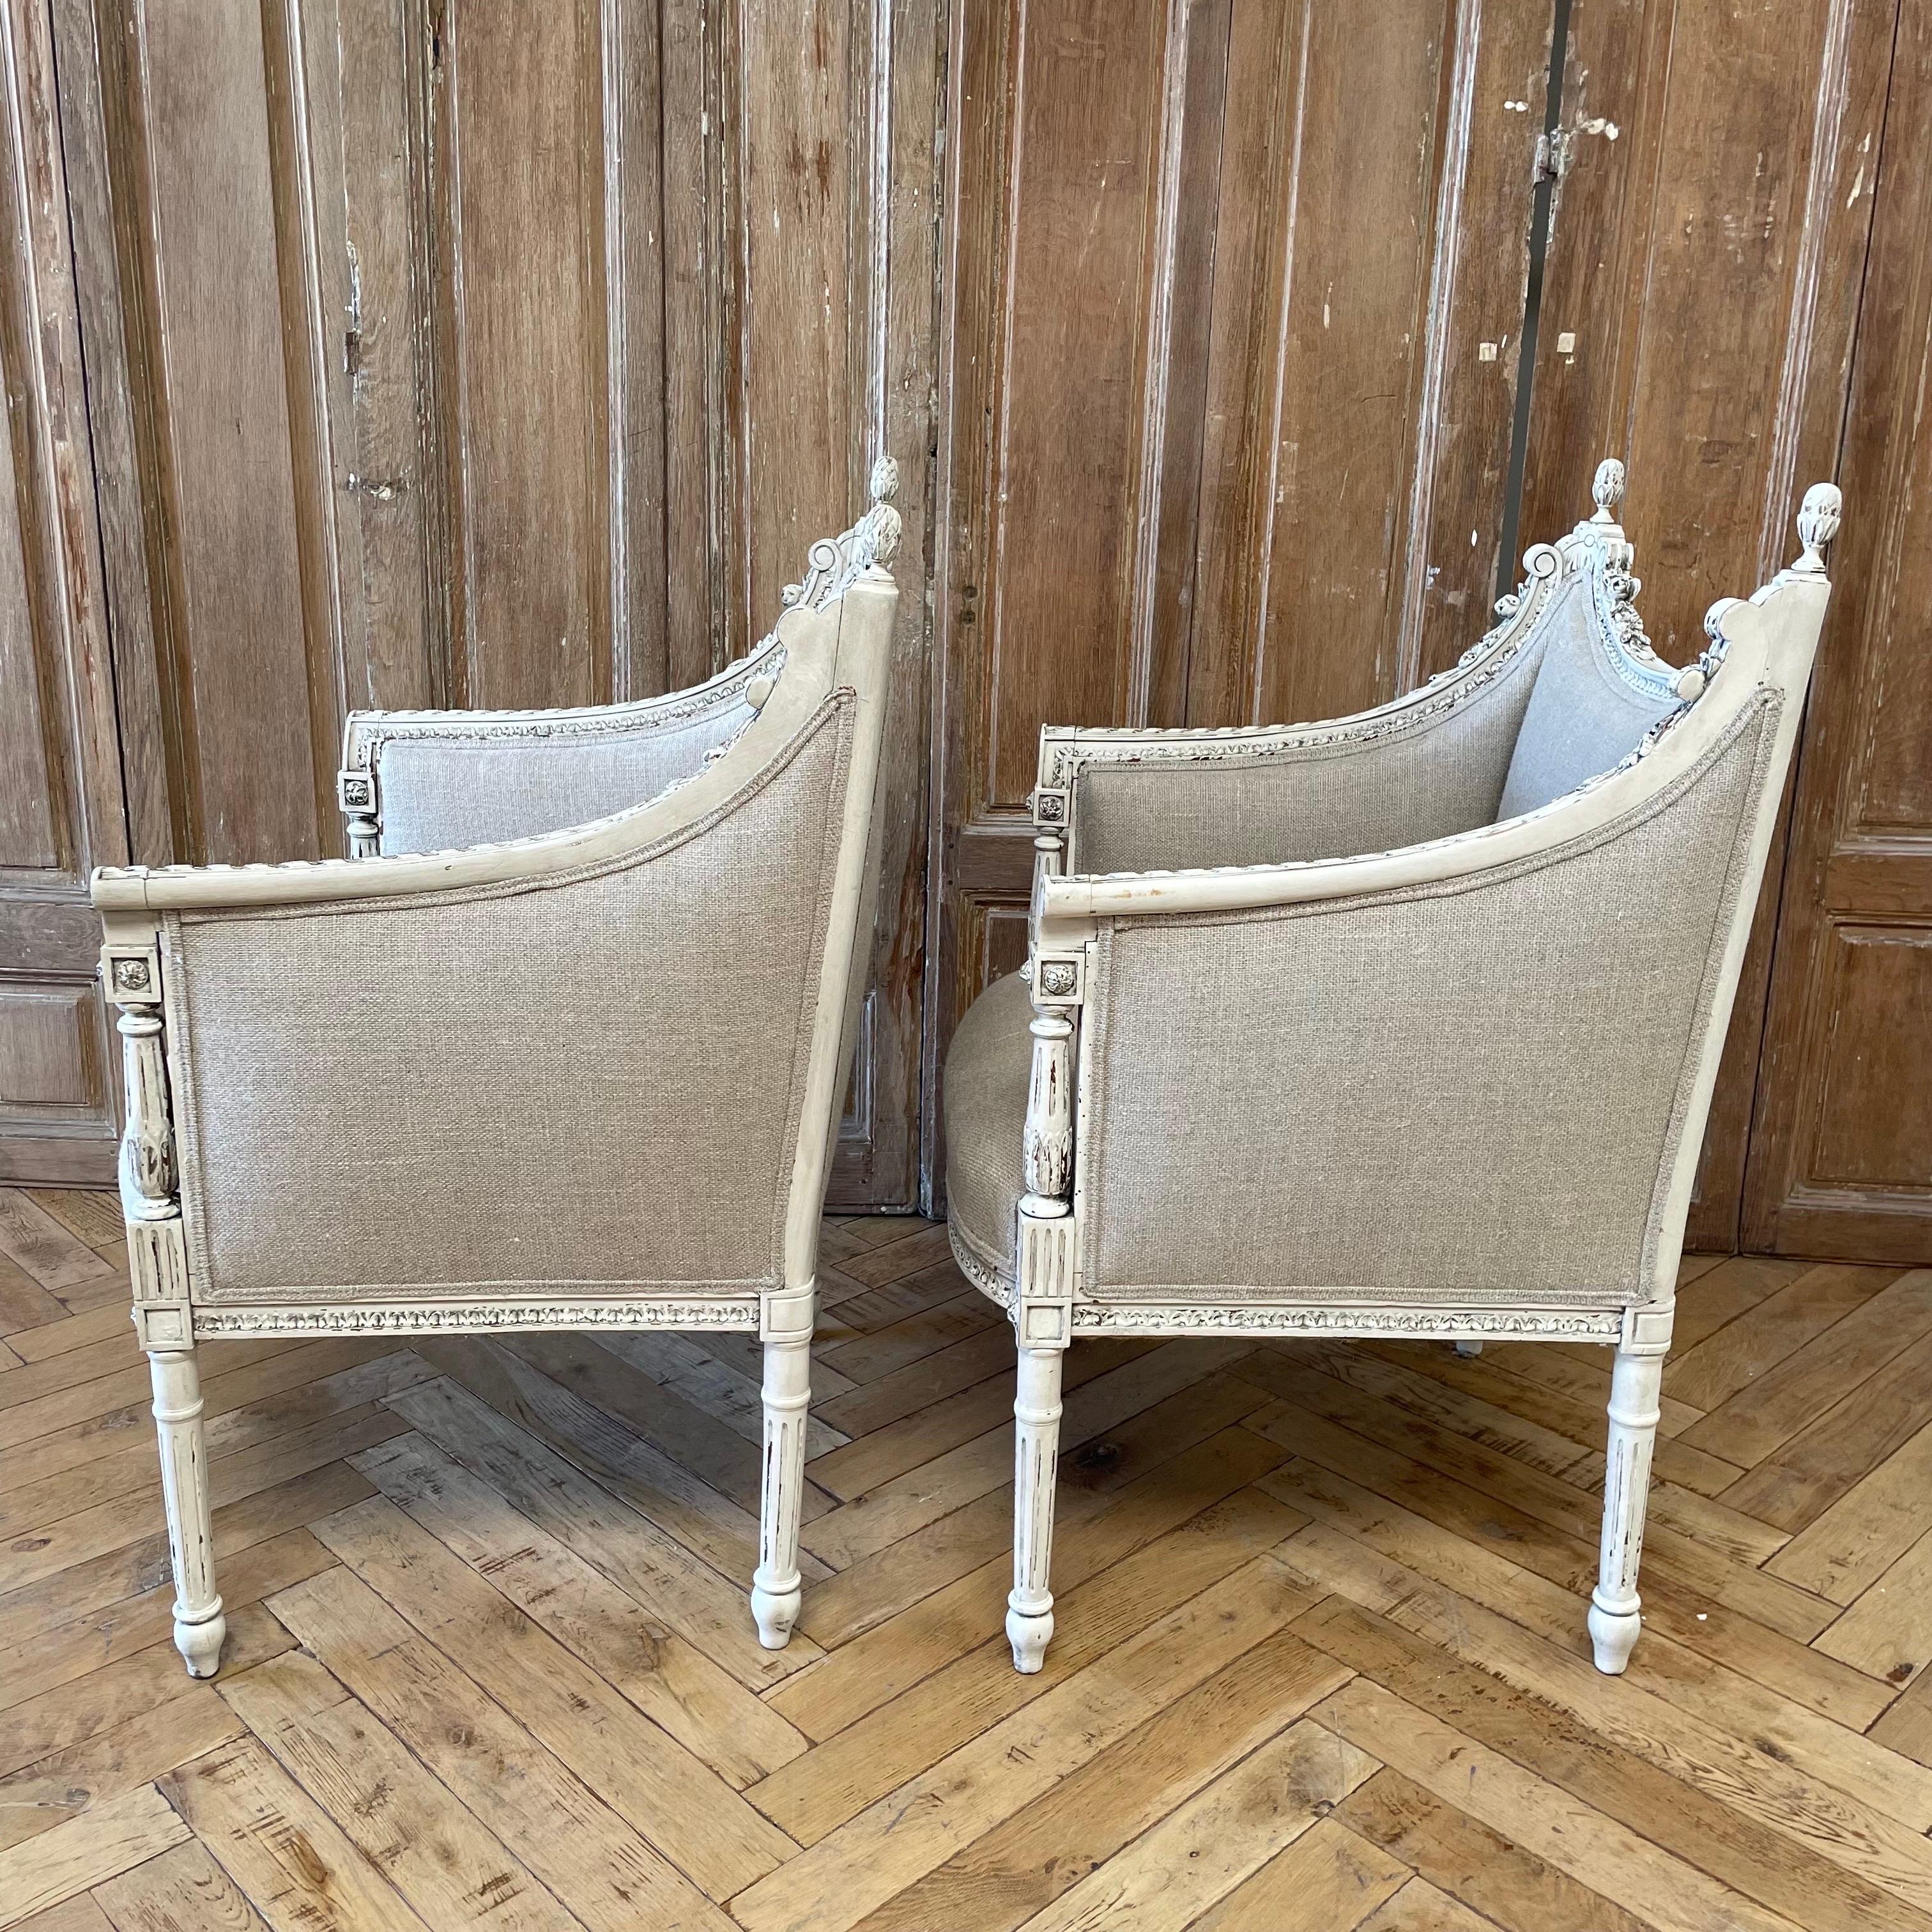 Pair of Antique Louis XVI Style Chairs Upholstered in Irish Natural Linen For Sale 7